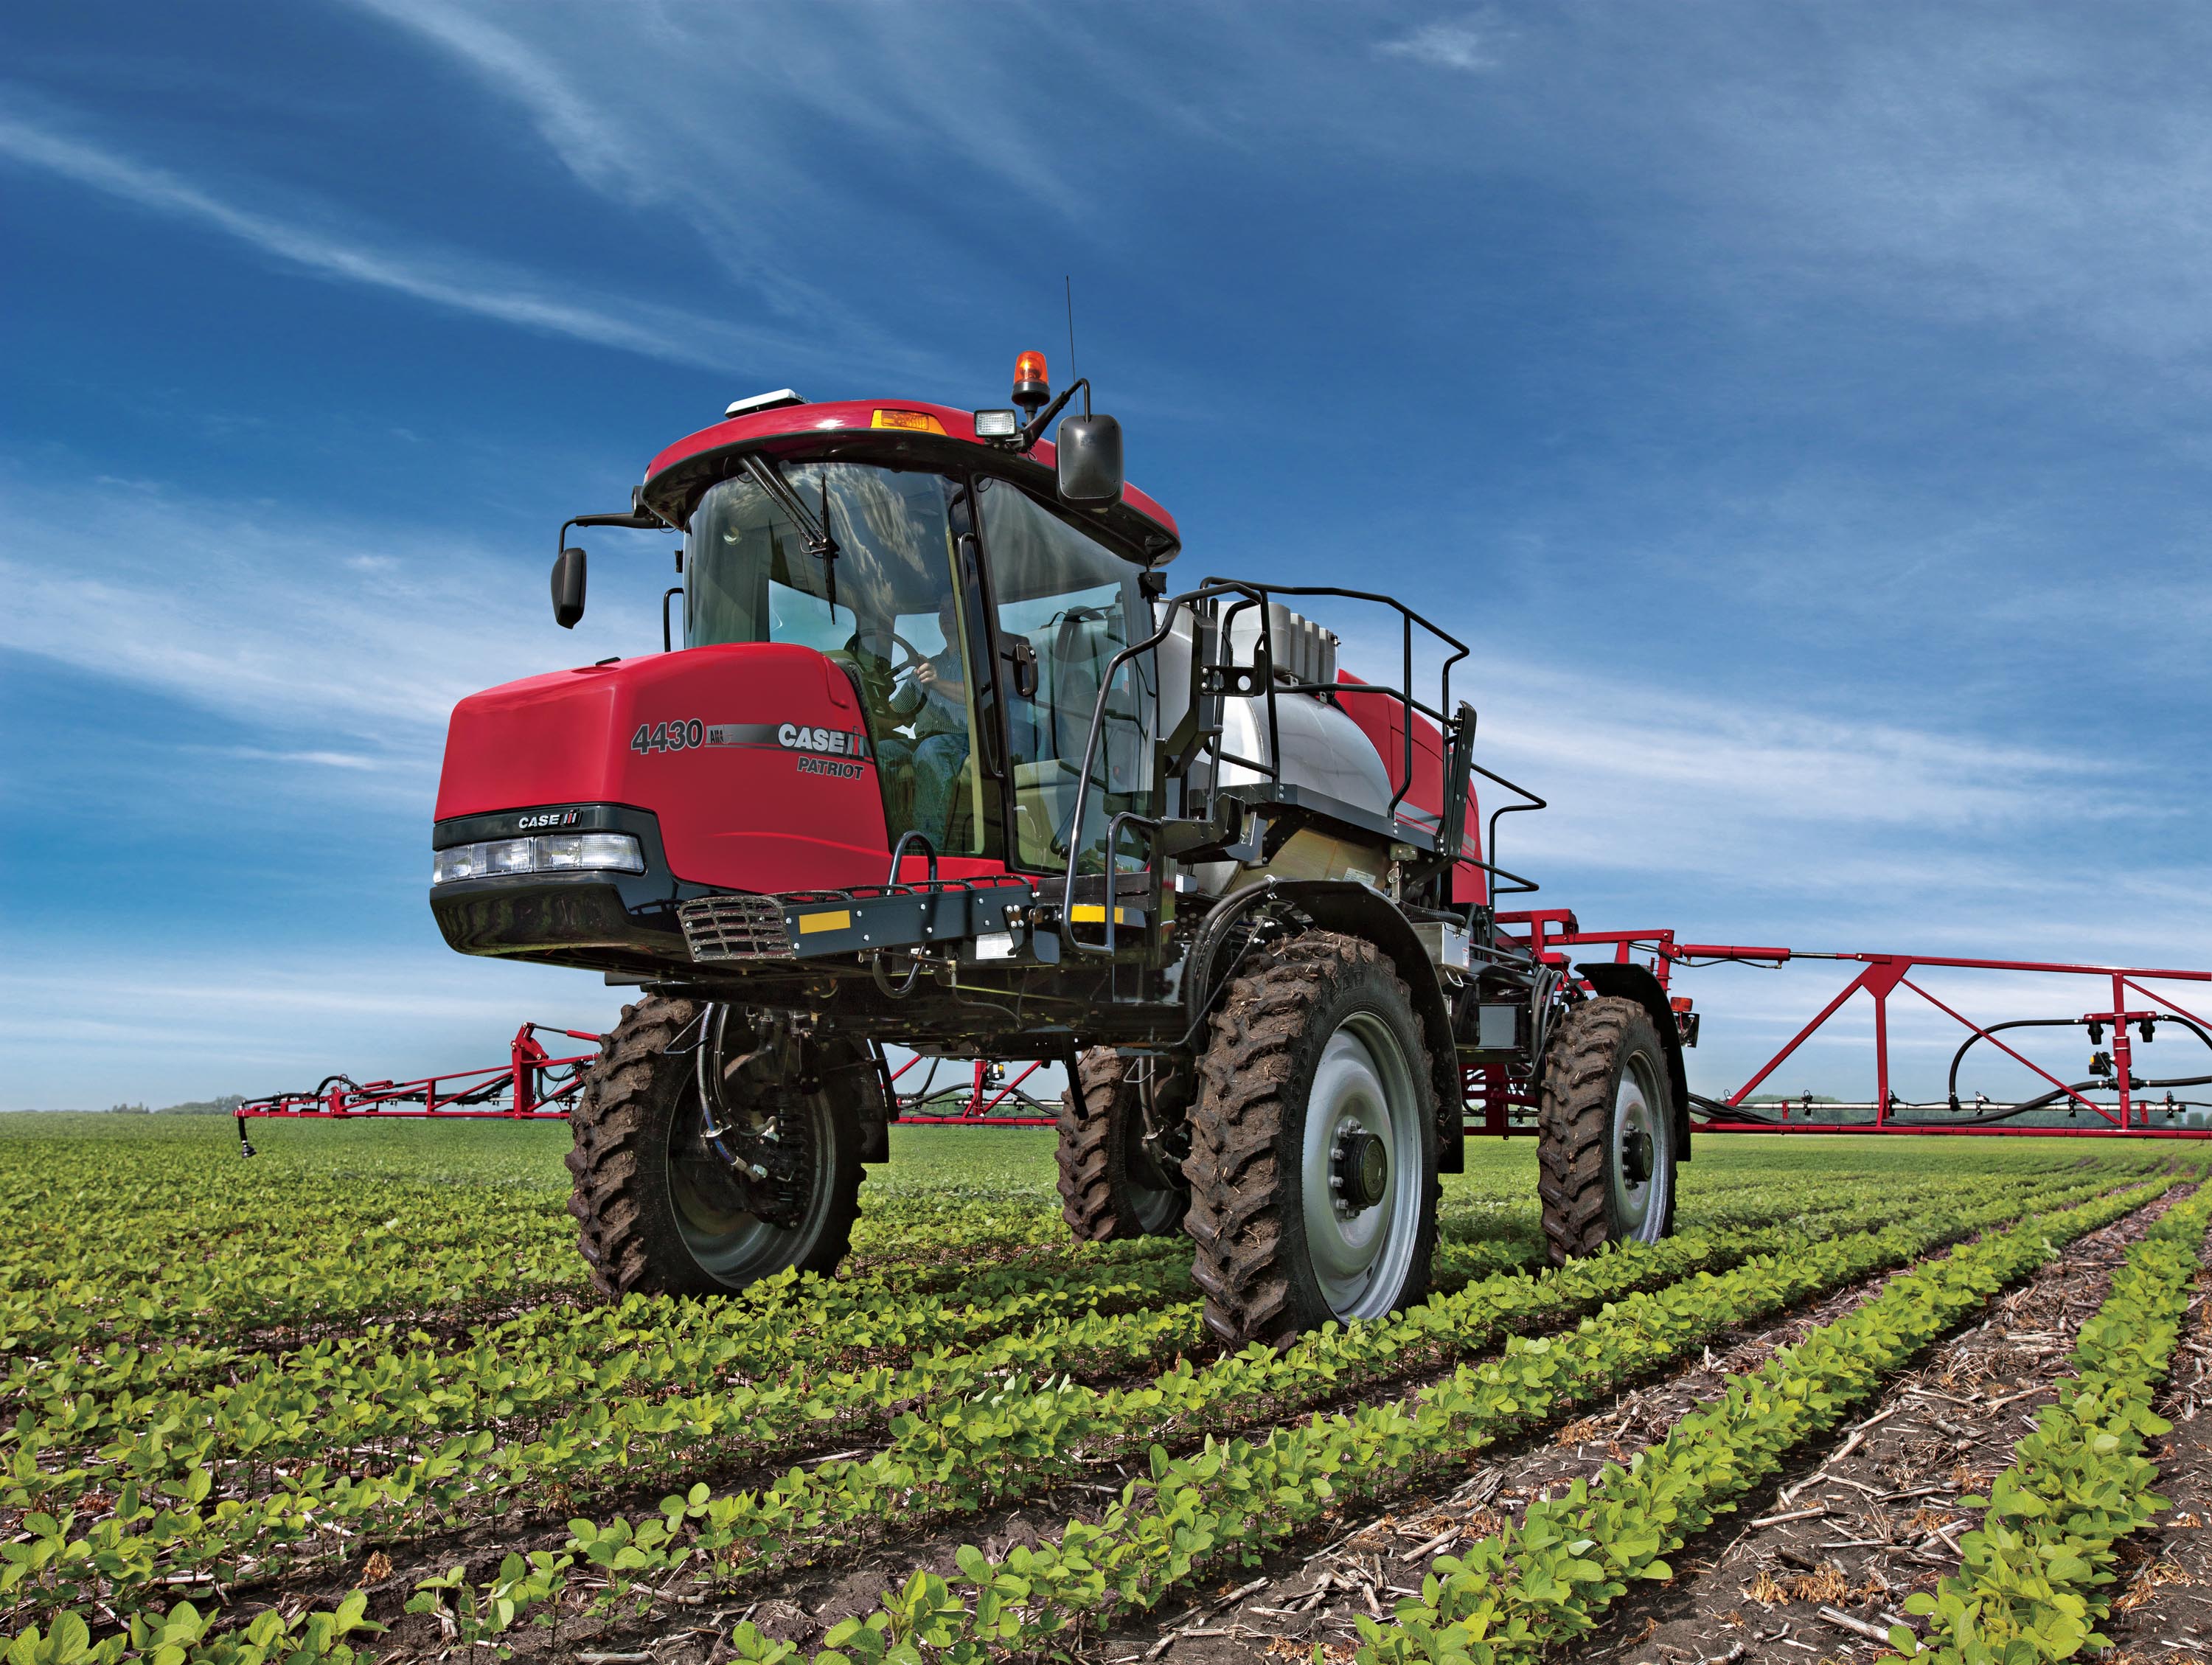 CASE IH SHOWCASES FULL LINE OF EQUIPMENT AND LAUNCHES NEW OFFERING OF IMPLEMENTS AT NAMPO 2014